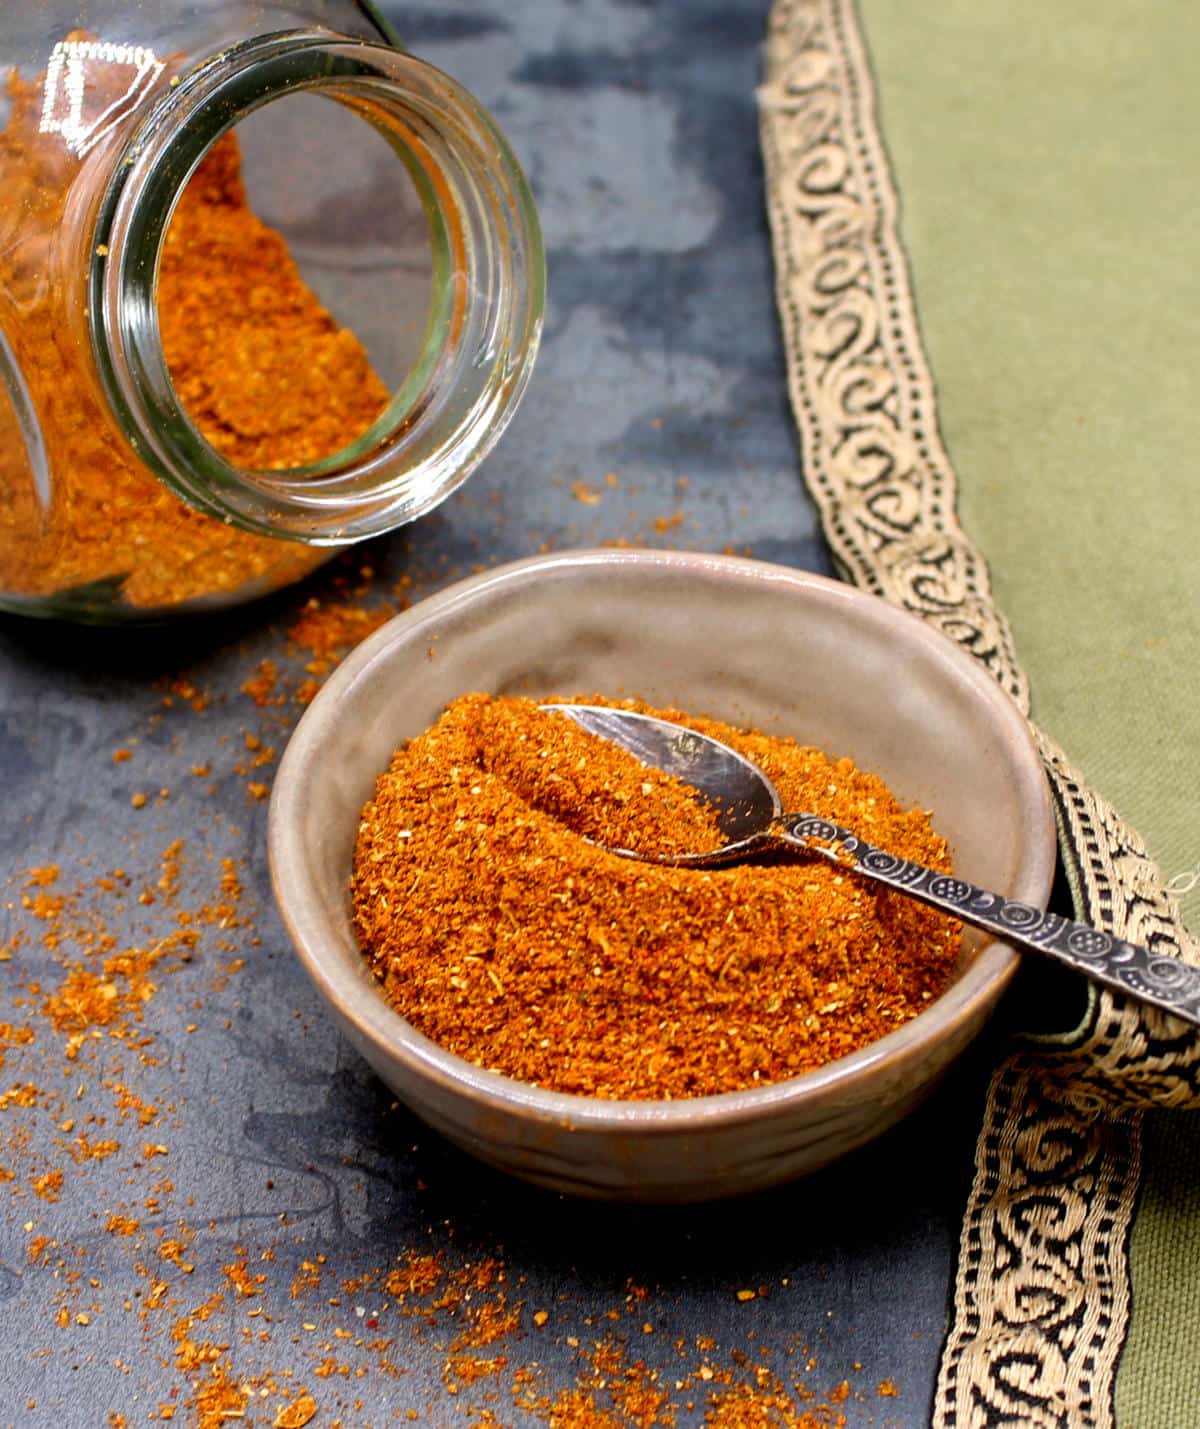 Mix the Moroccan ras el hanout spices in bowls and glasses with spoons.